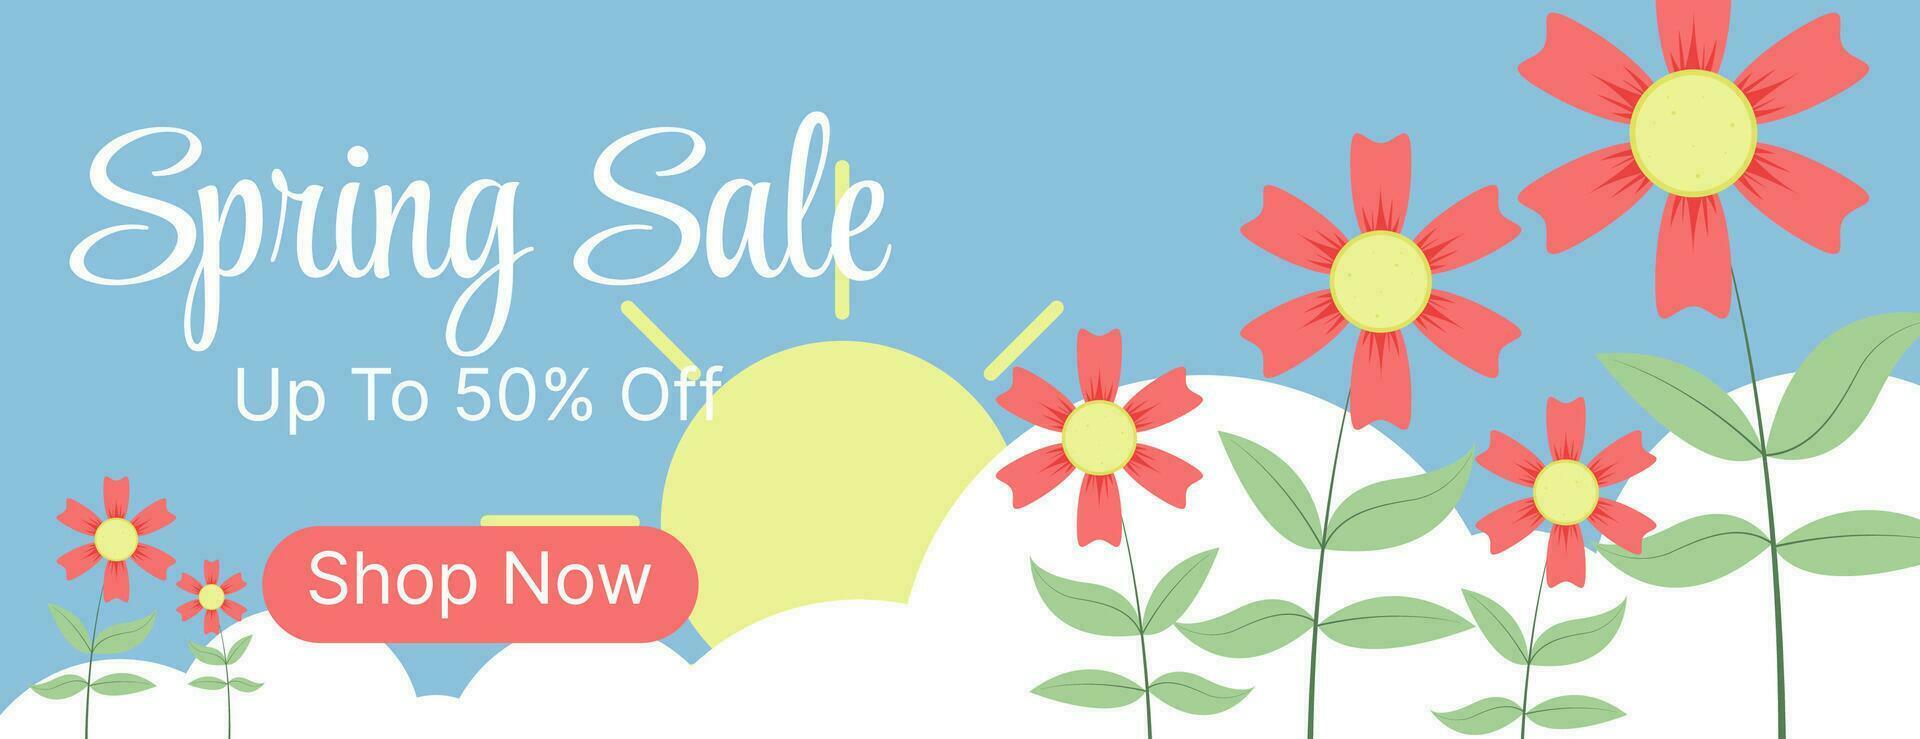 flat spring sale banner background design with flowers, leaves, clouds and sun vector